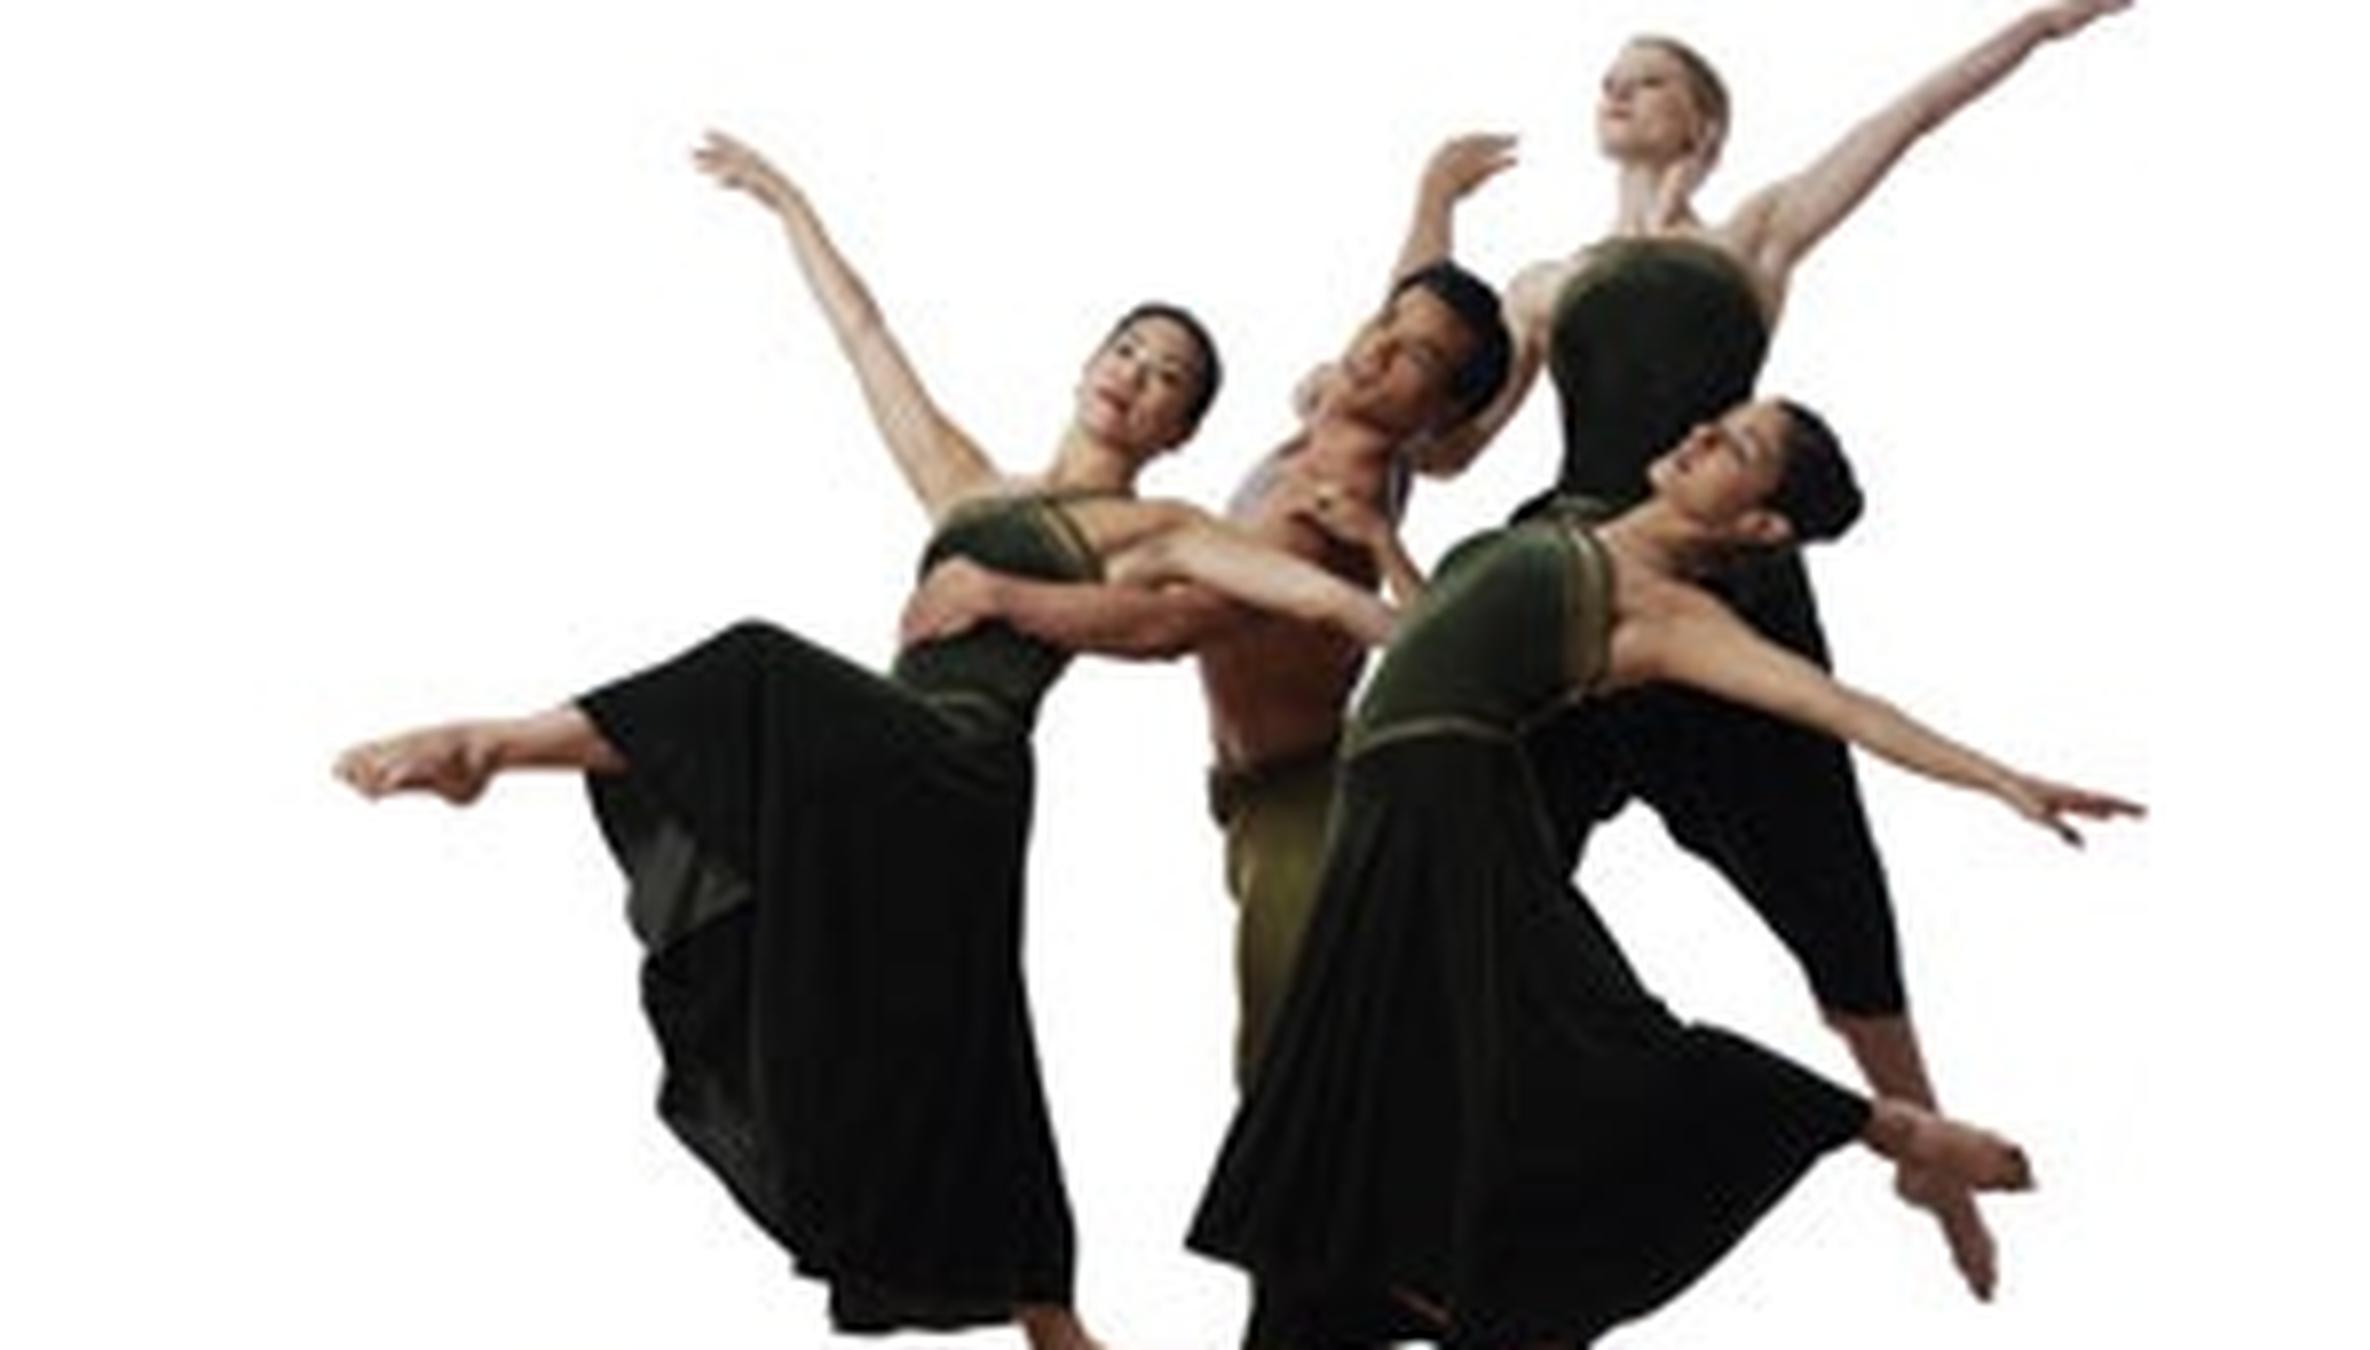 group dance photoshoot poses - Google Search | Dance team photos, Dance team  pictures, Dance photography poses